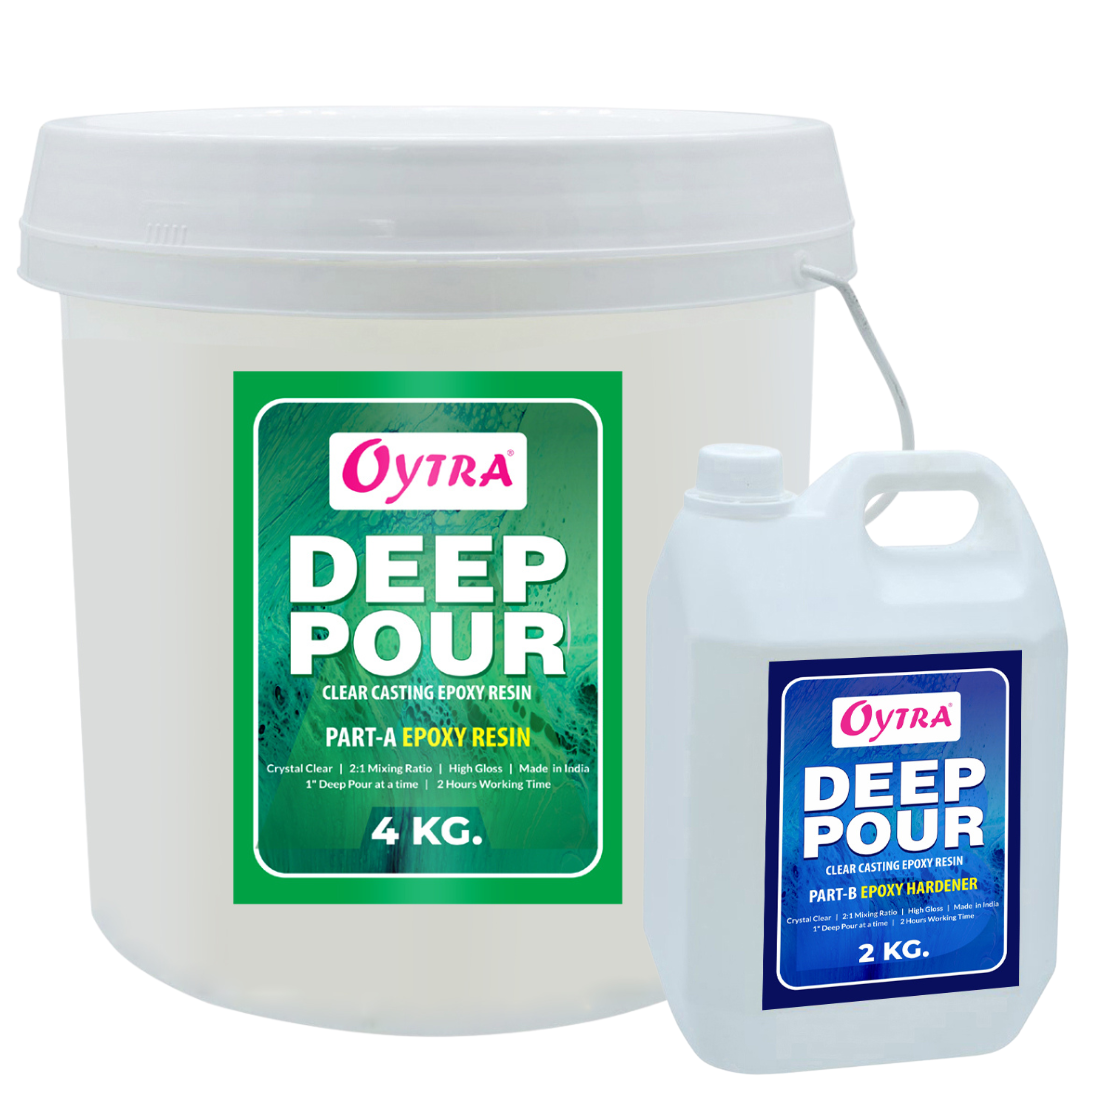 Oytra Deep Pour Casting Resin